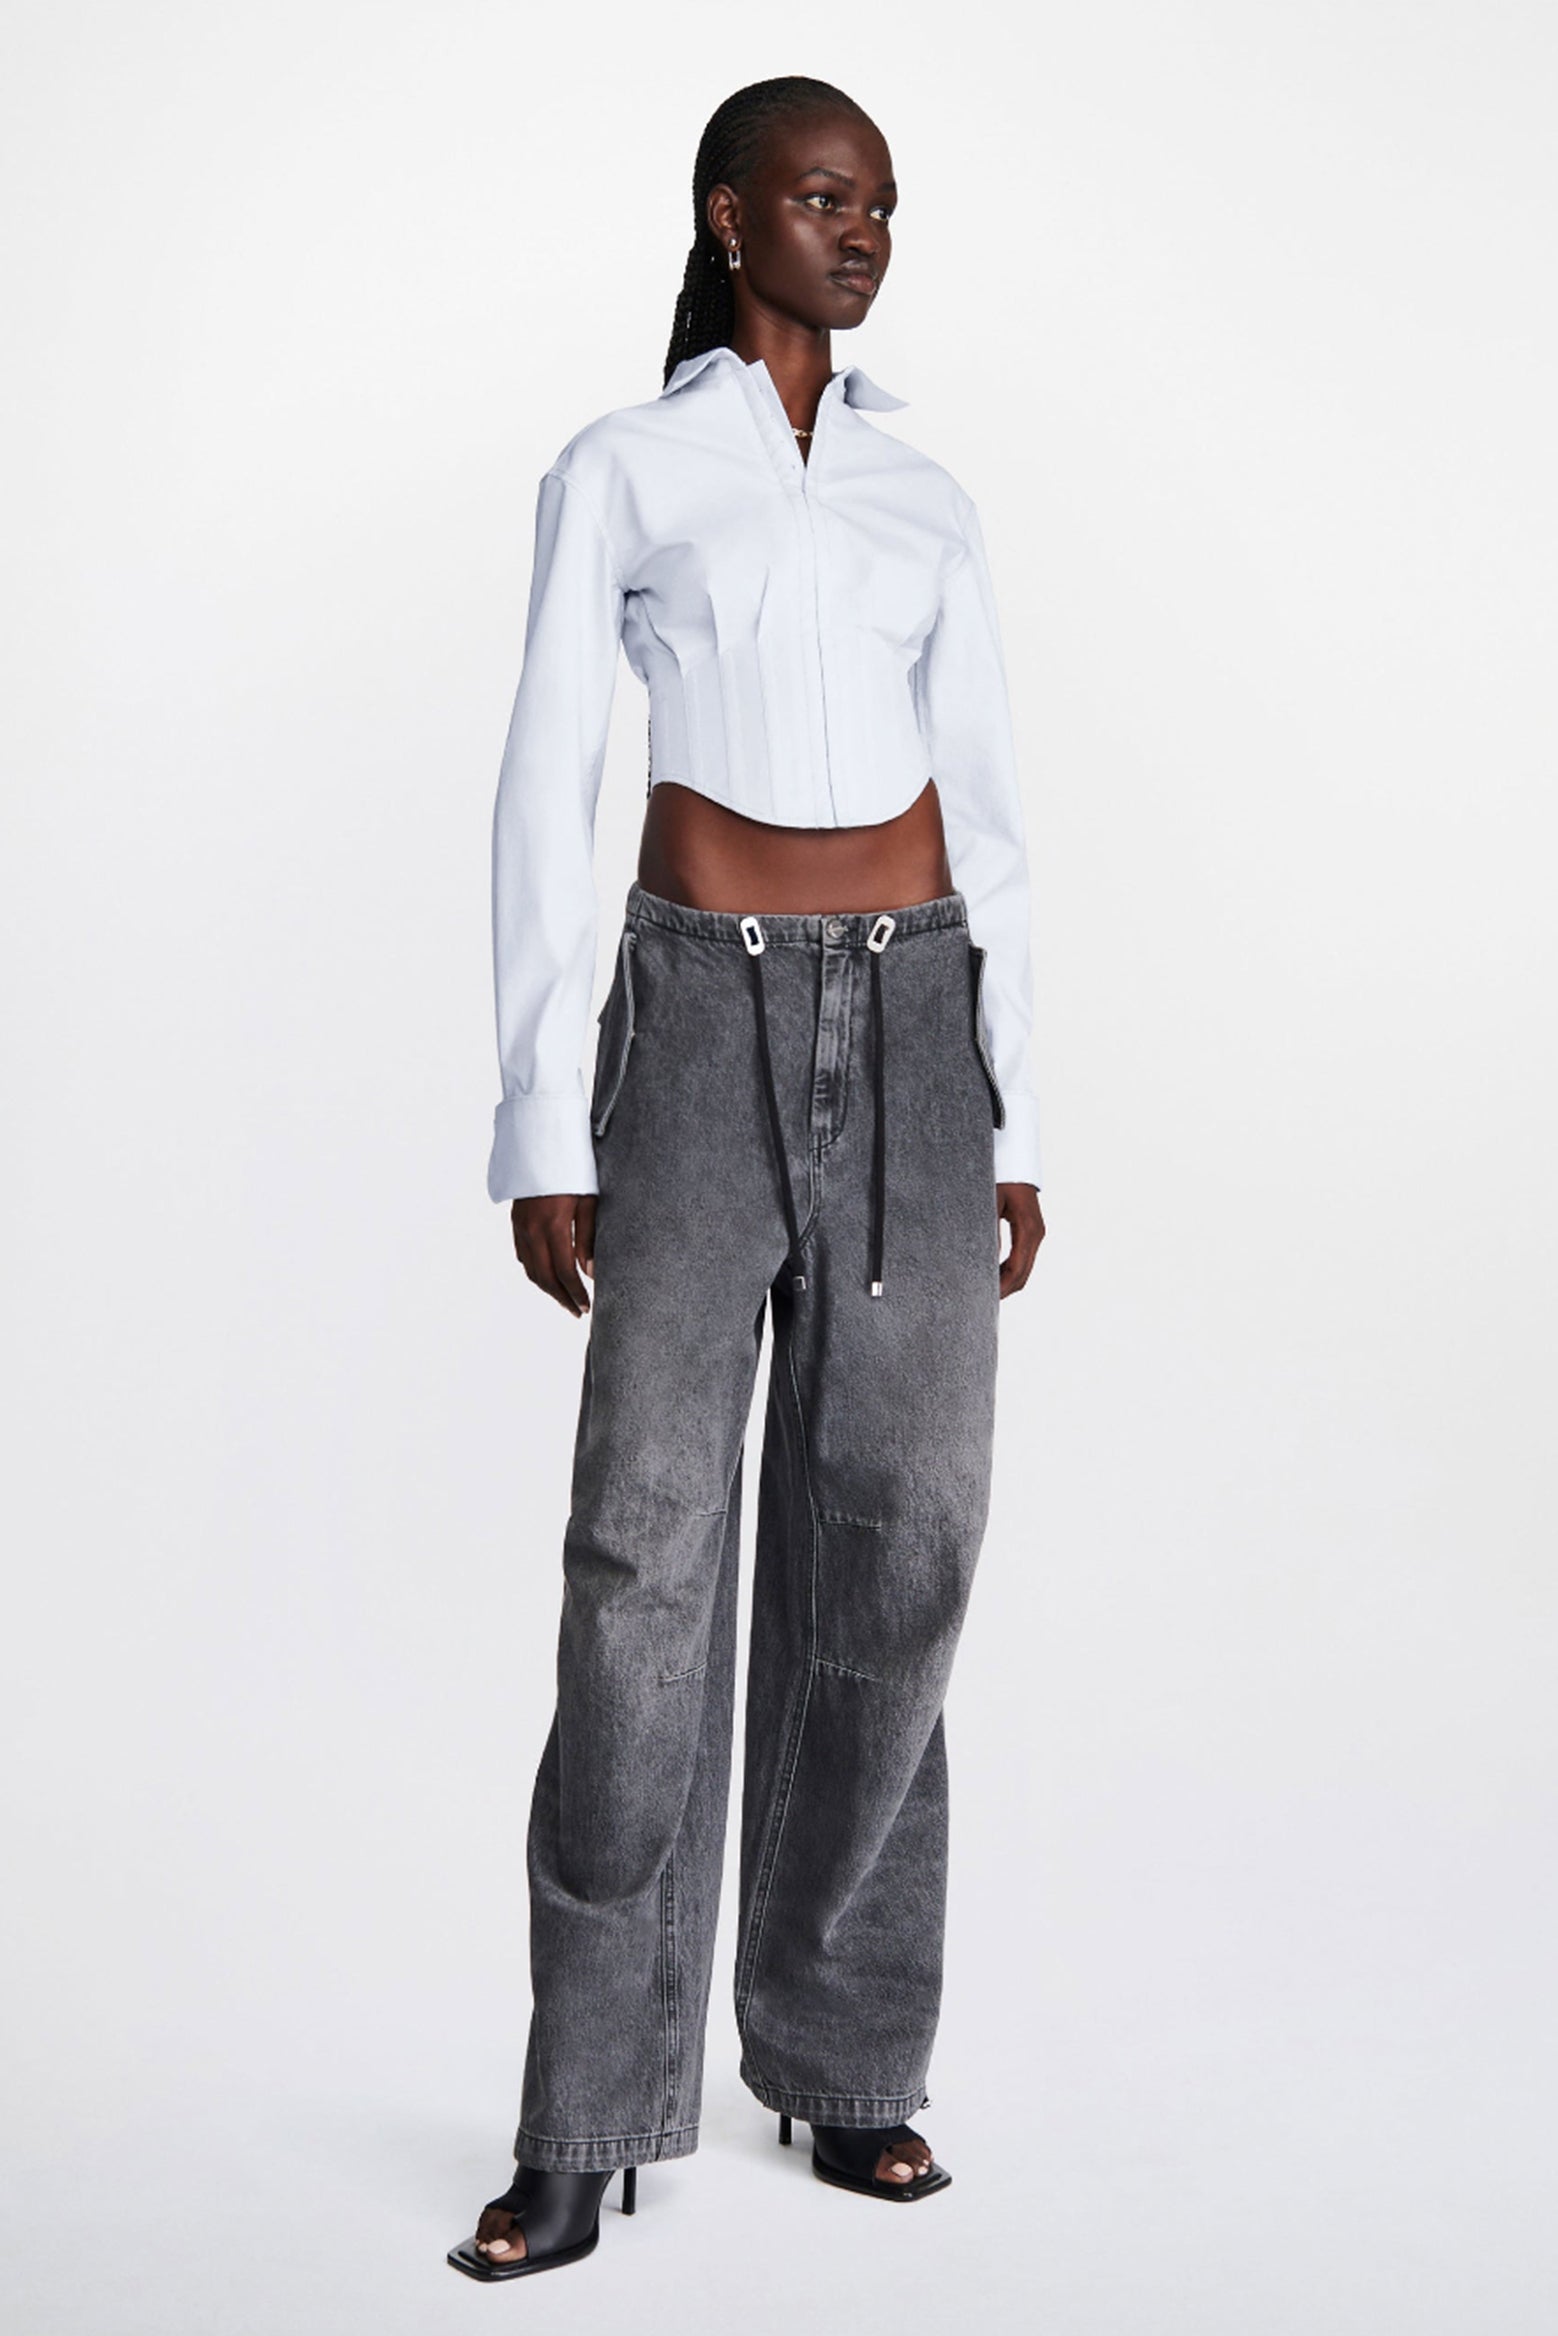 The Dion Lee Parachute Jean in Black available at The New Trend Australia